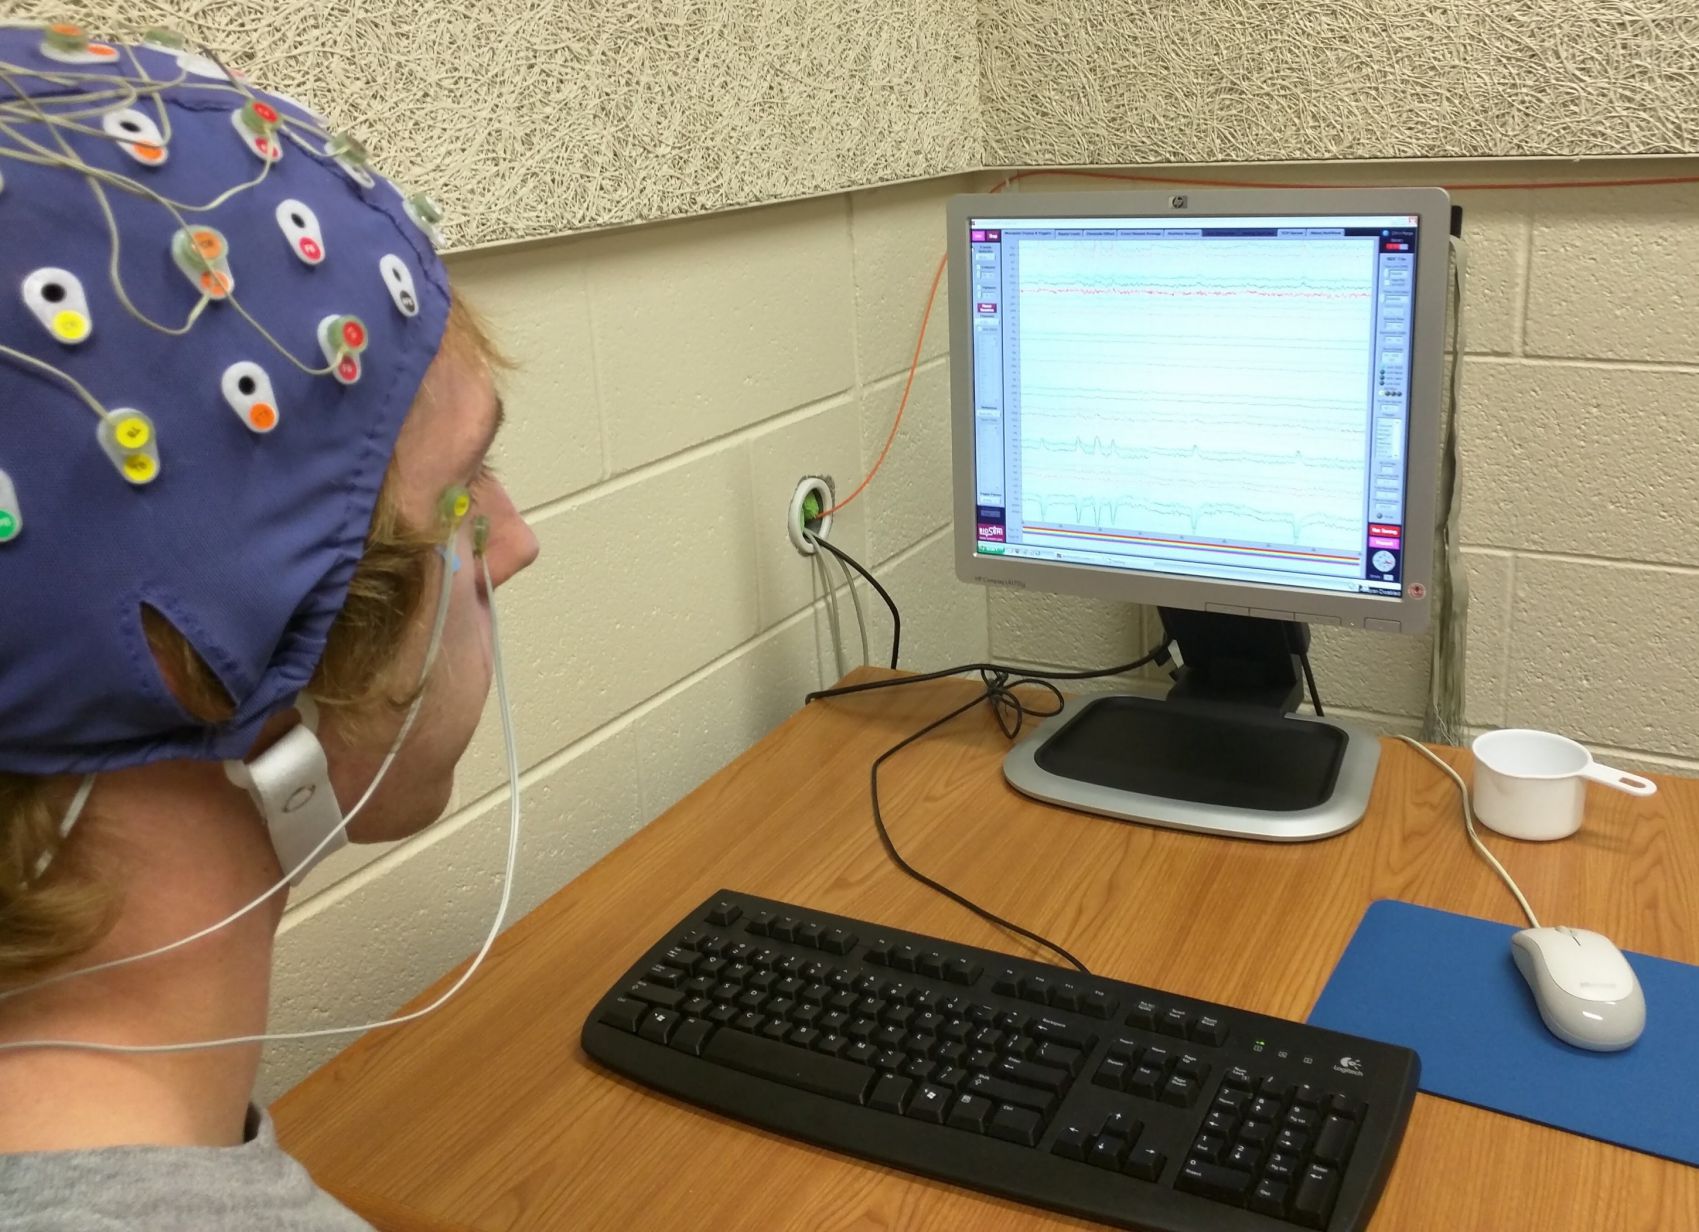 Show young male participating in an EEG experiment